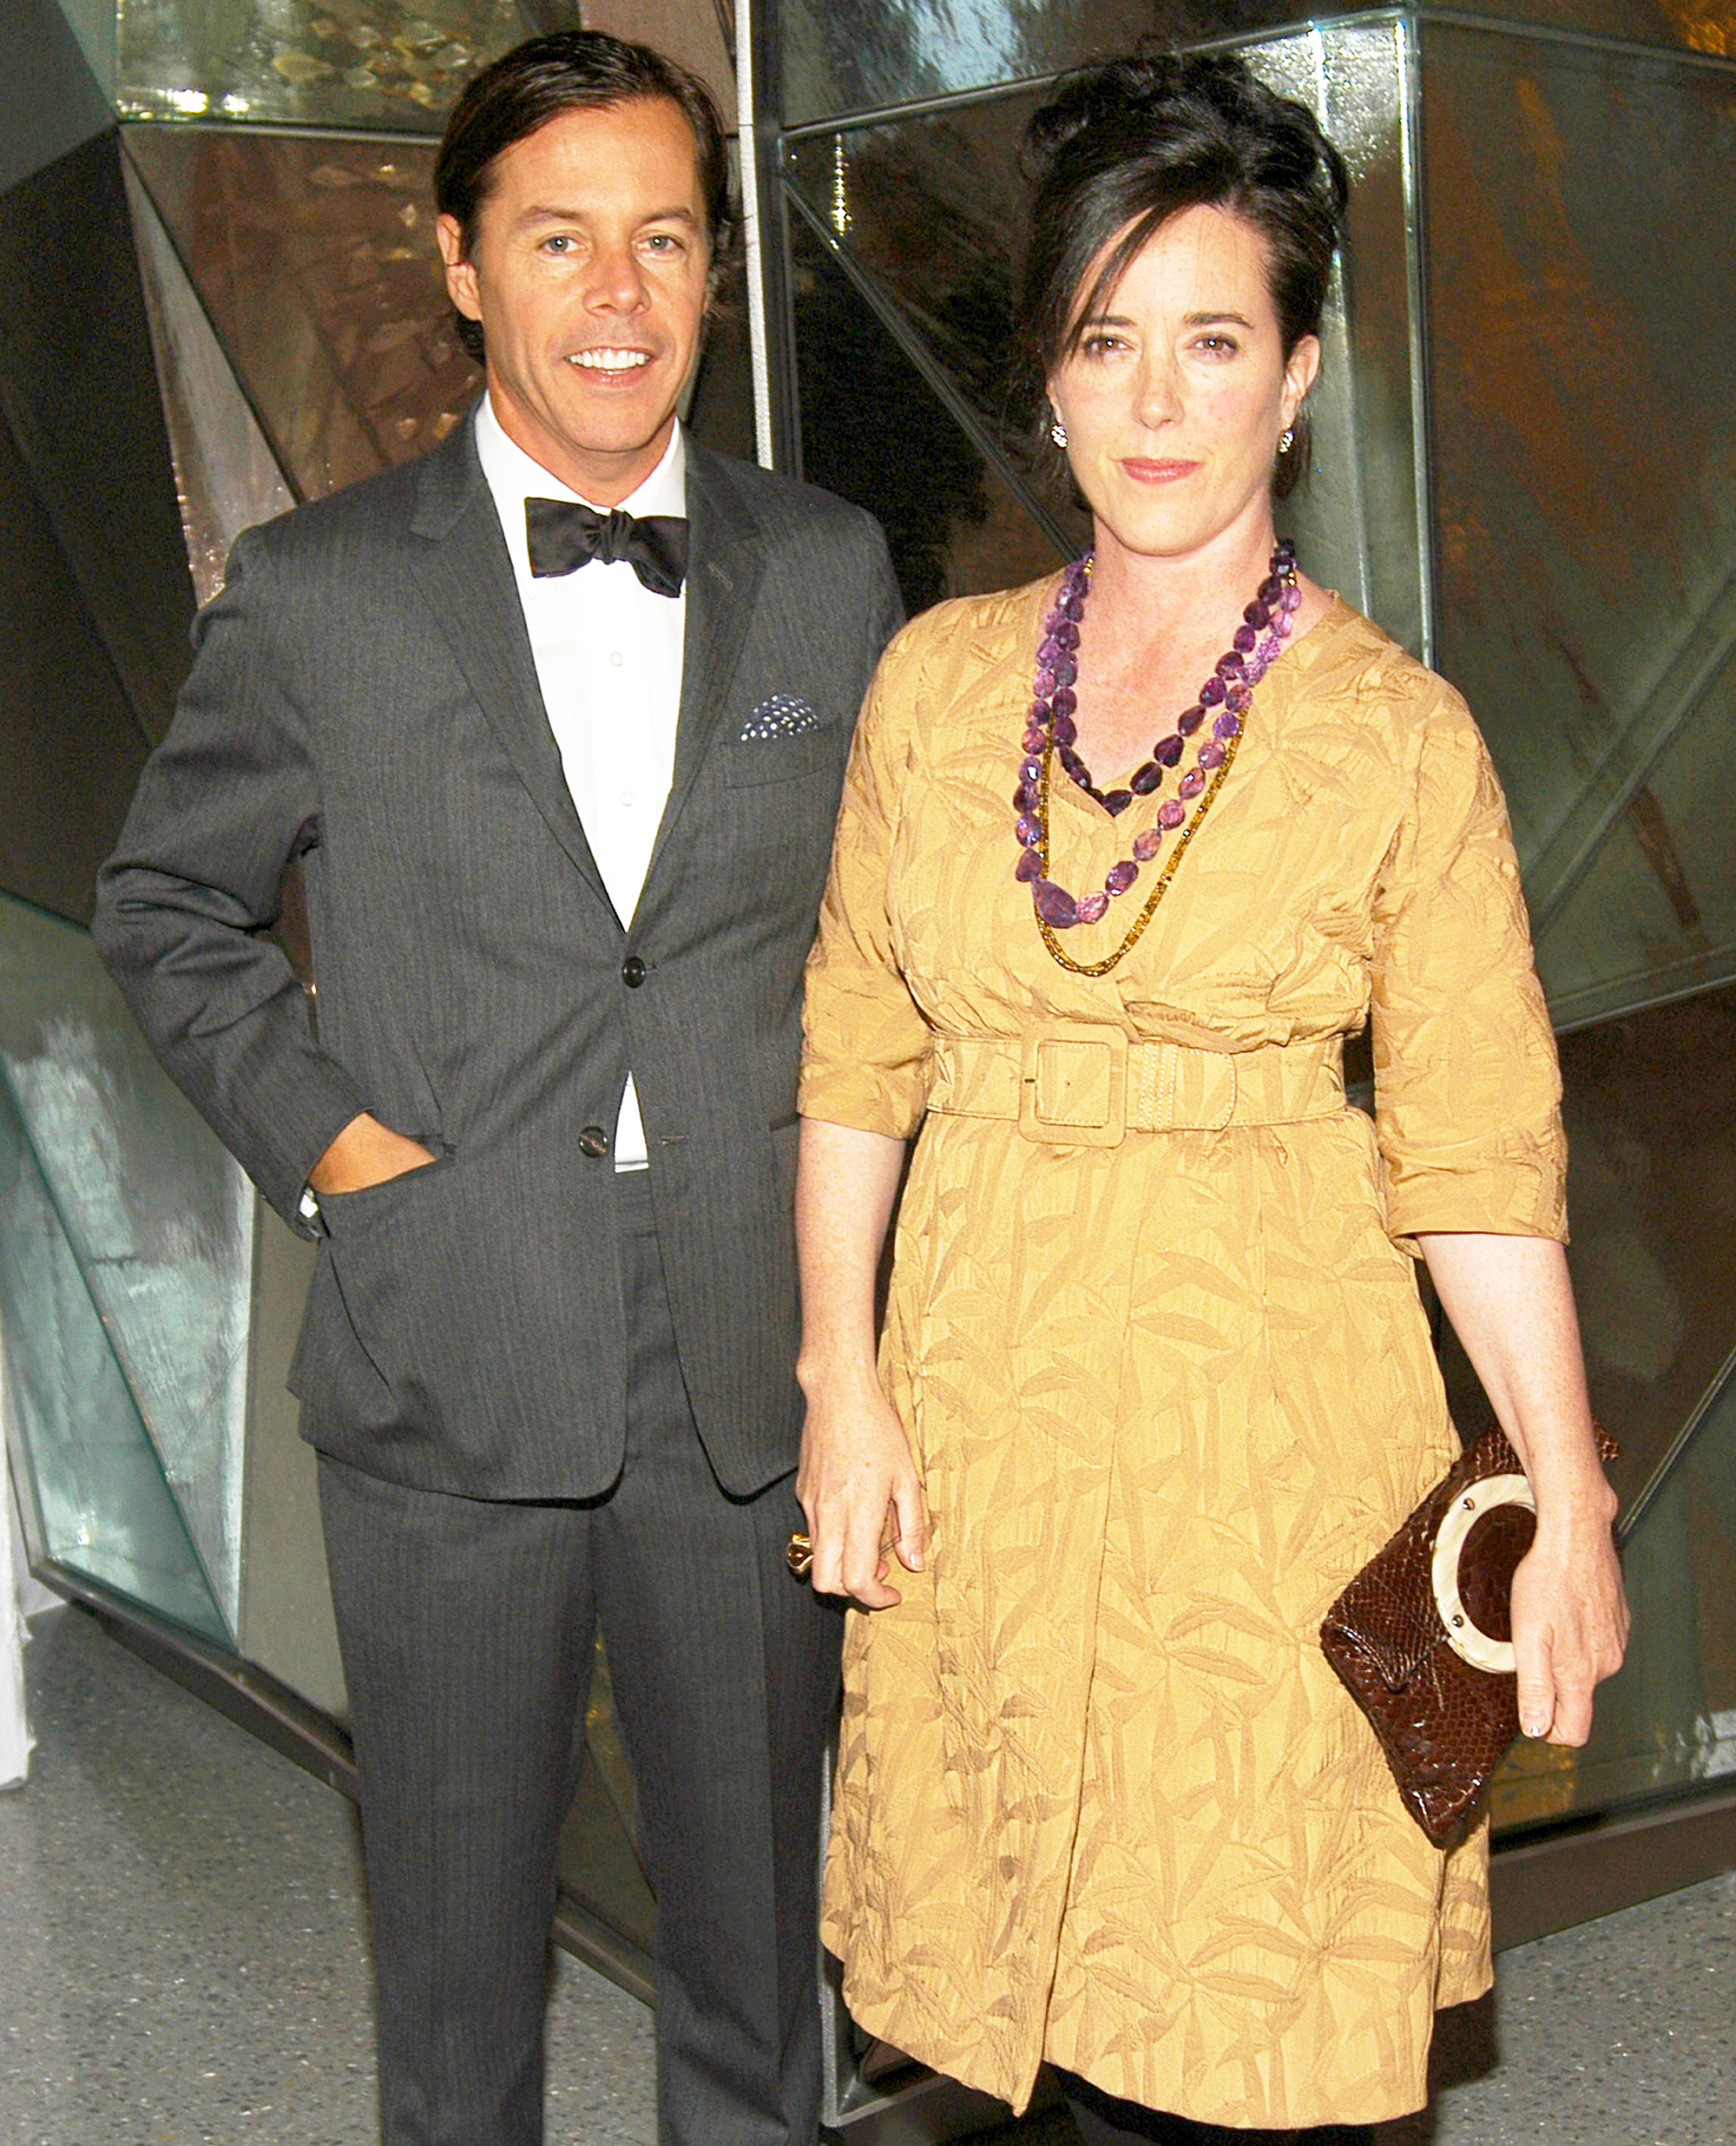 Kate Spade, Husband Were Separated Before Her Suicide